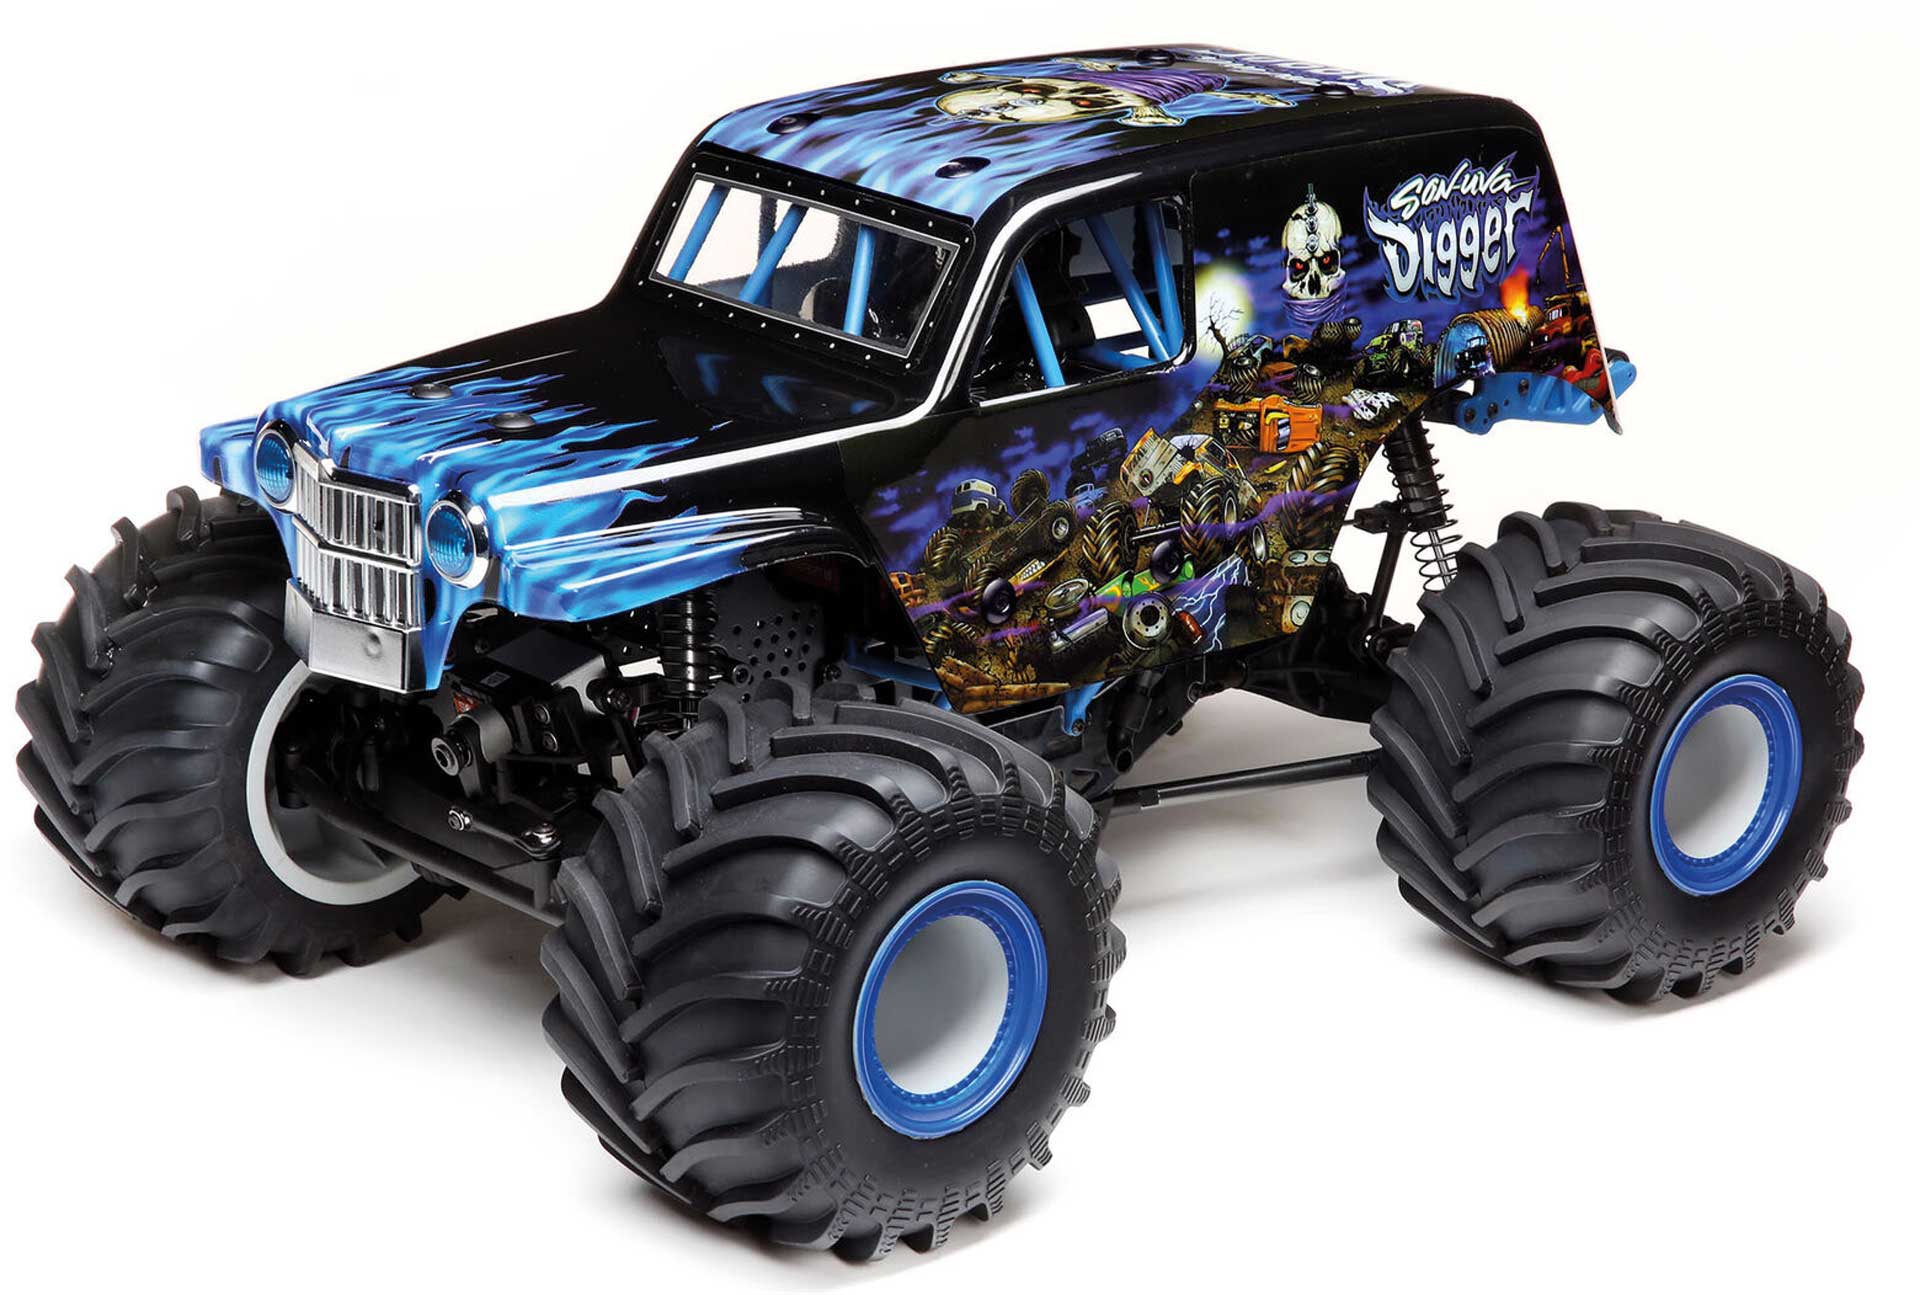 LOSI LMT:4wd Solid Axle Monster Truck, SonUvaDigger:RTR